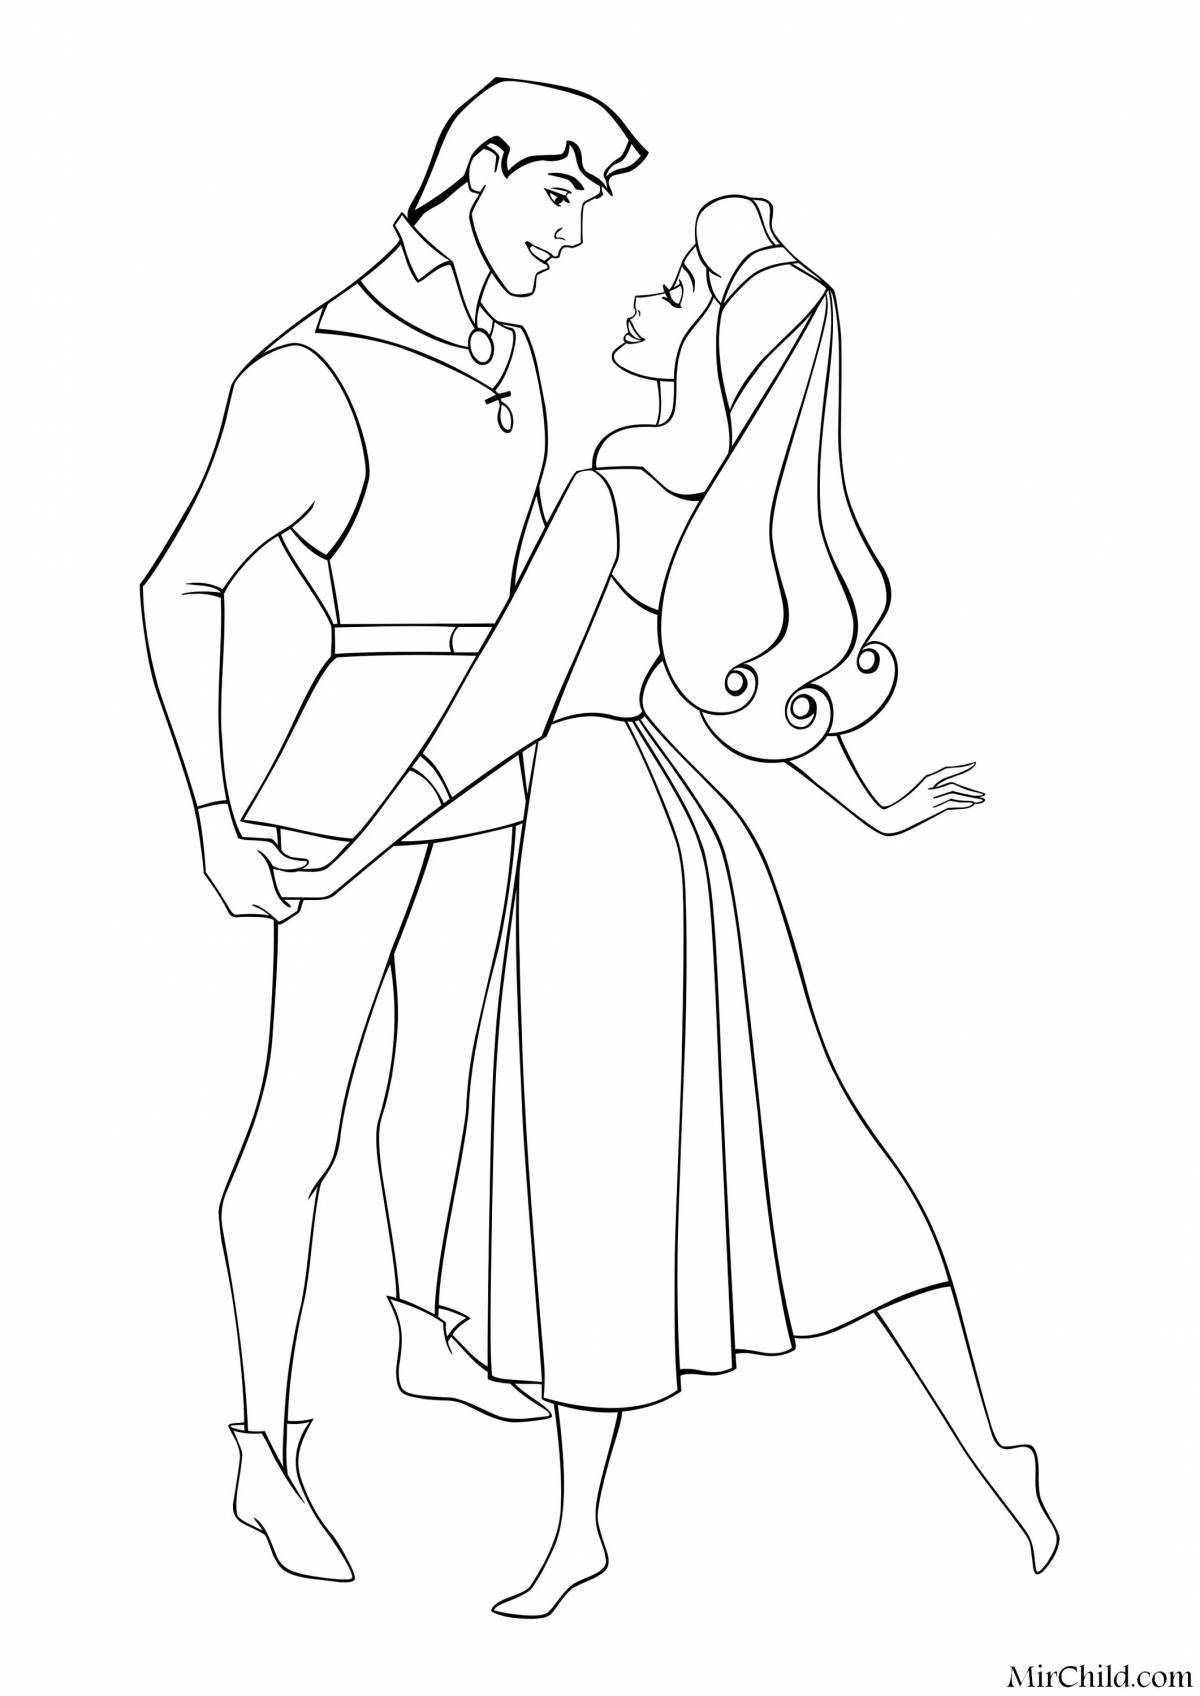 Exotic romeo and juliet coloring pages